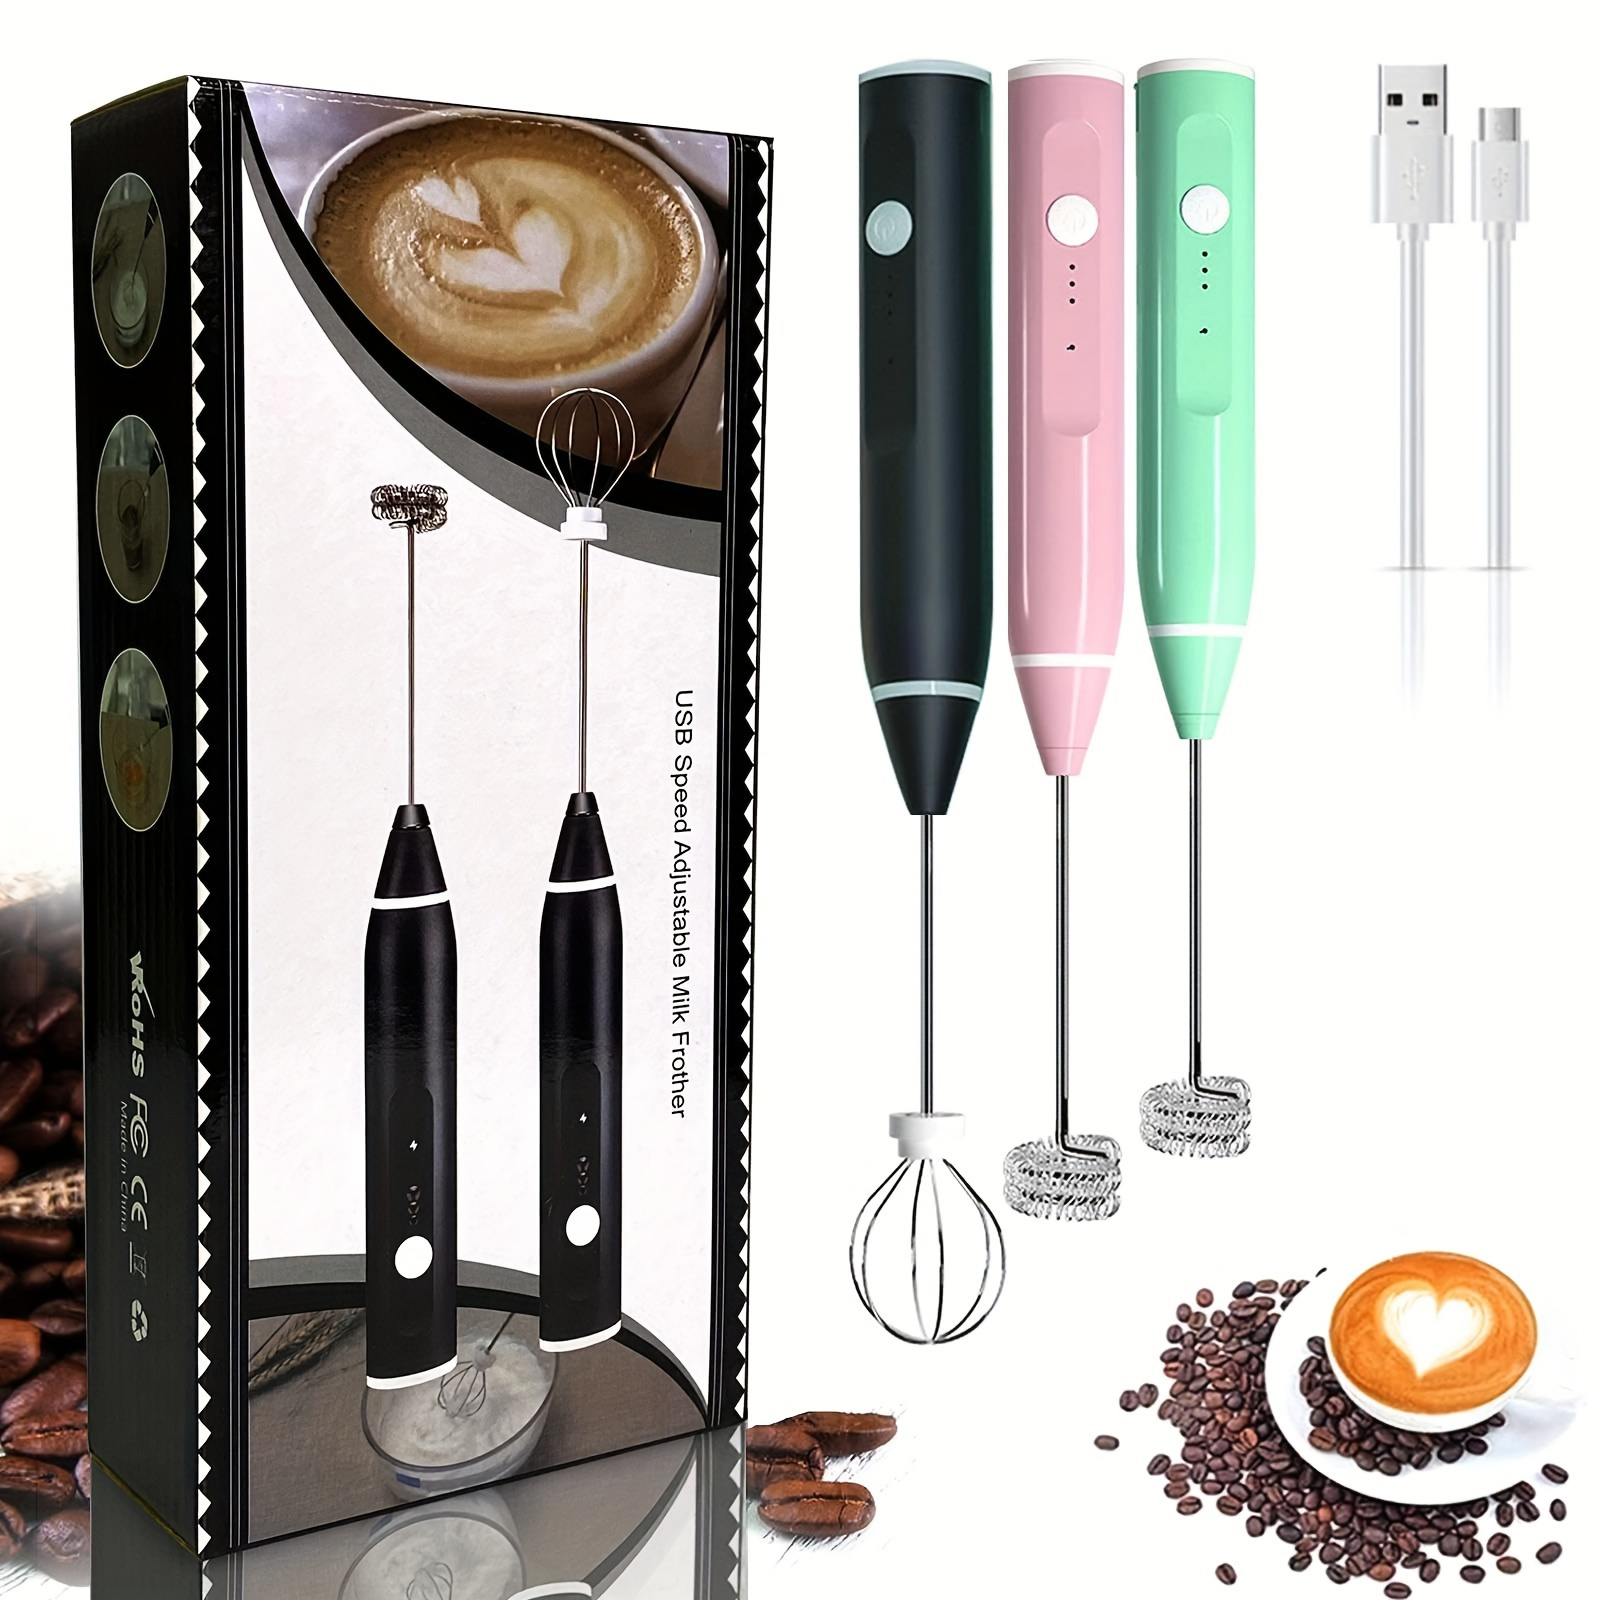 https://img.kwcdn.com/product/milk-frother/d69d2f15w98k18-4f5d474c/Material/ImageCut/6e8819d8-8d89-44e3-84ab-1392c92182f2.jpg